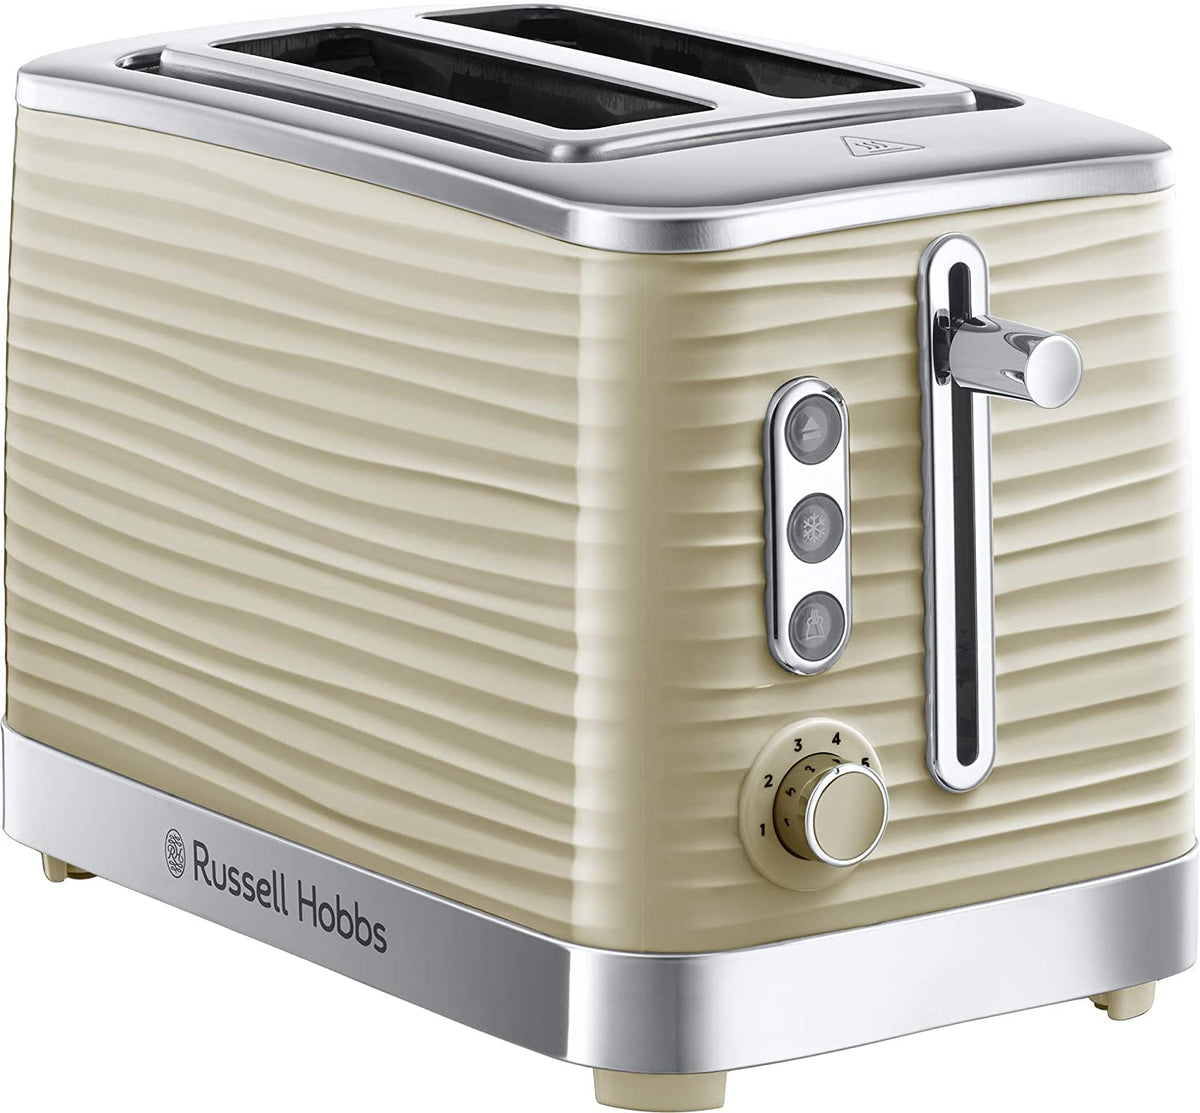 Home toaster - Structure - RUSSELL HOBBS - 2-slice / 4-slice